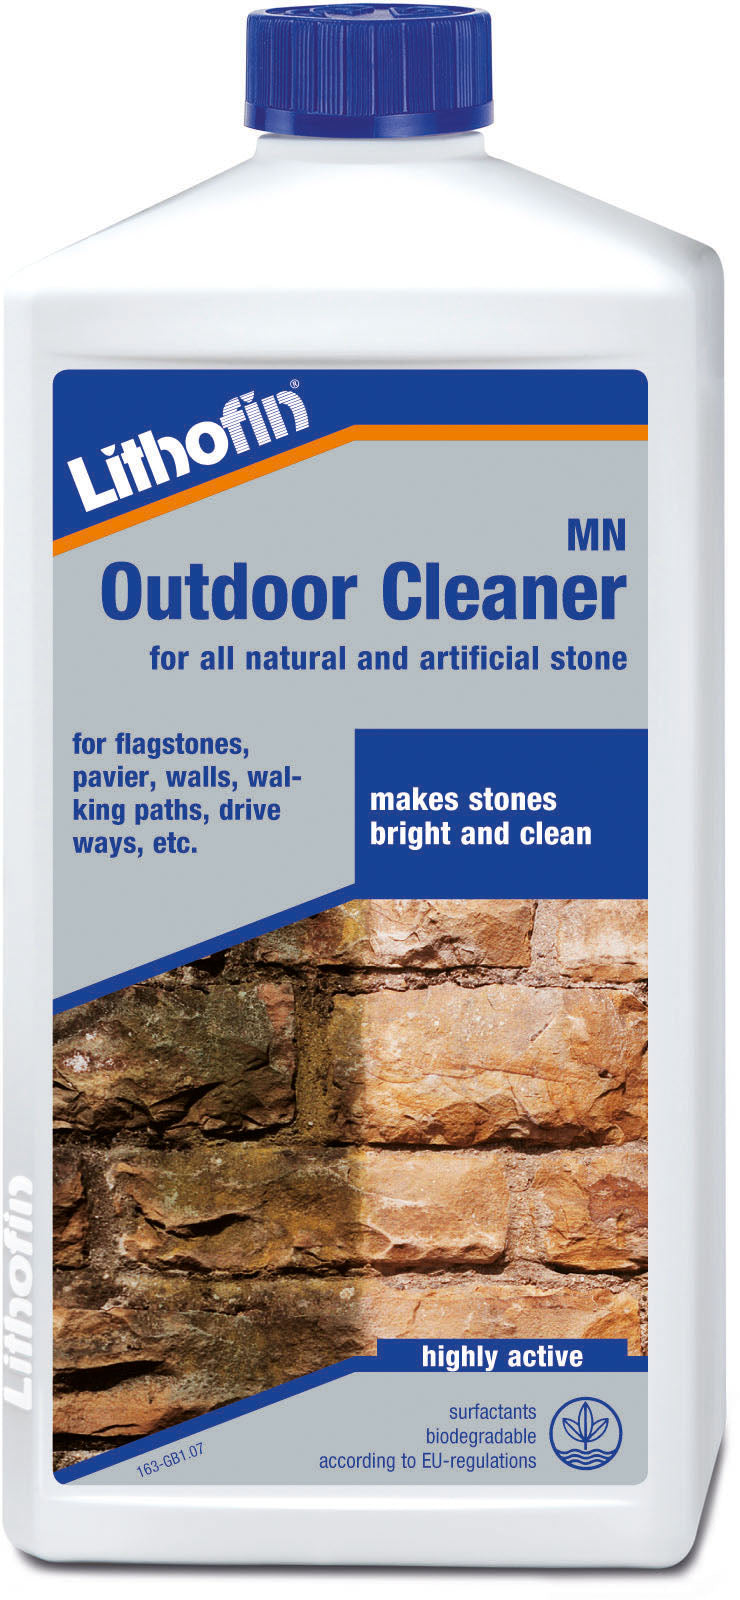 Lithofin outdoor cleaner for all natural and artificial stone 